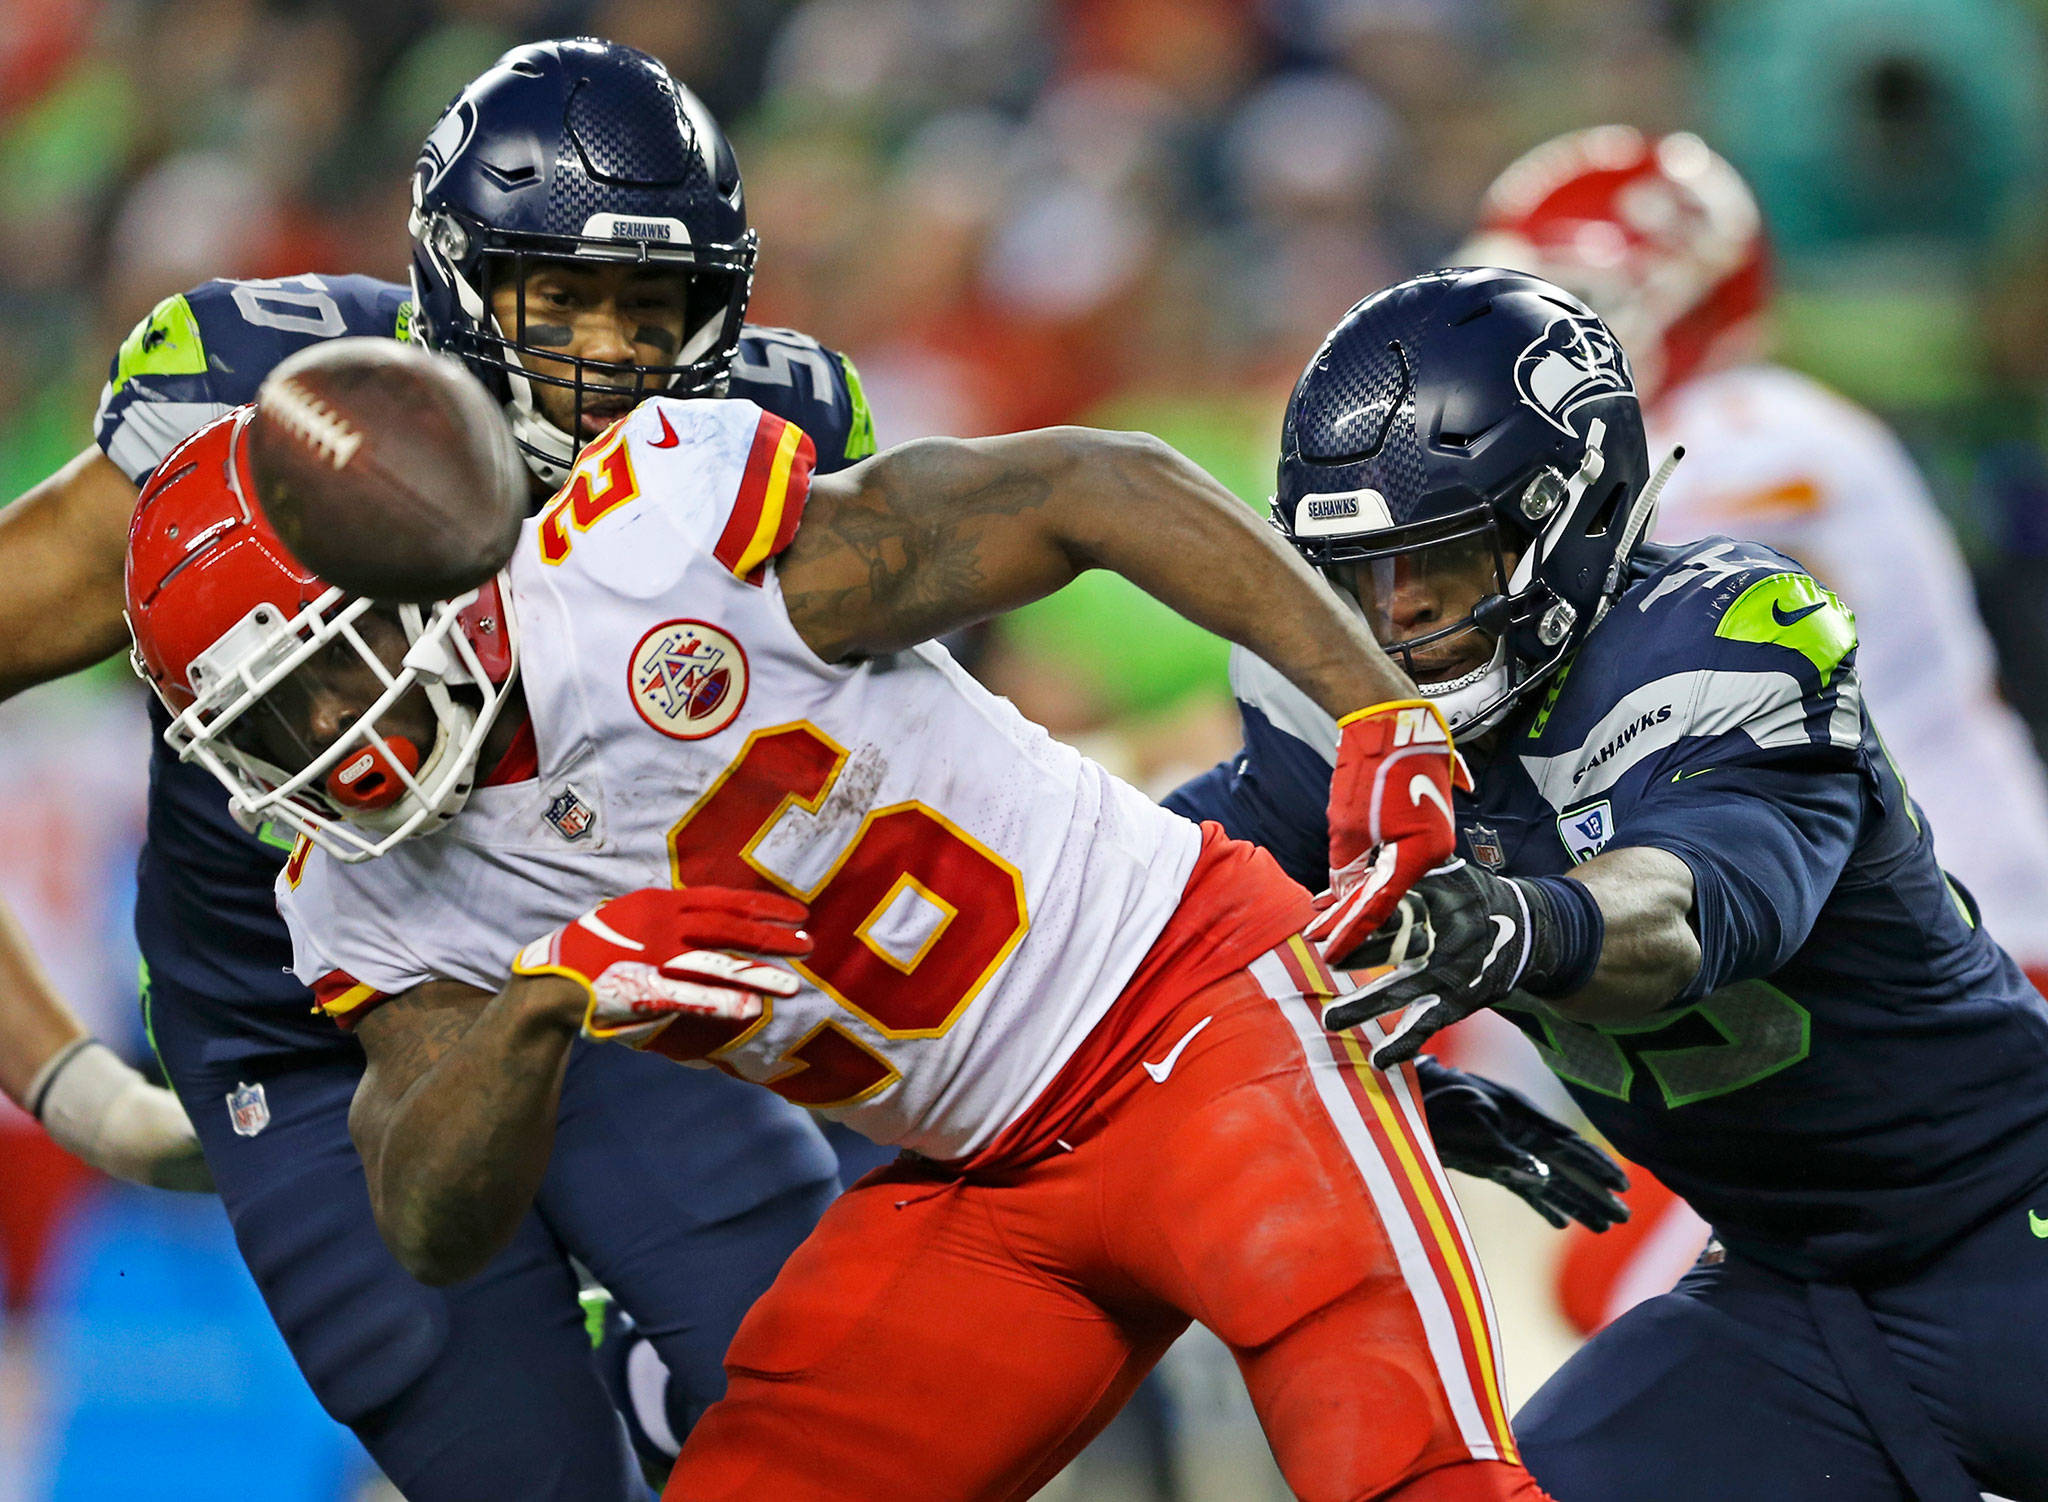 Kansas City running back Damien Williams fumbles the ball during Sunday’s game in Seattle. The Seahawks recovered two fumbles in their 38-31 win. (Olivia Vanni / The Herald)